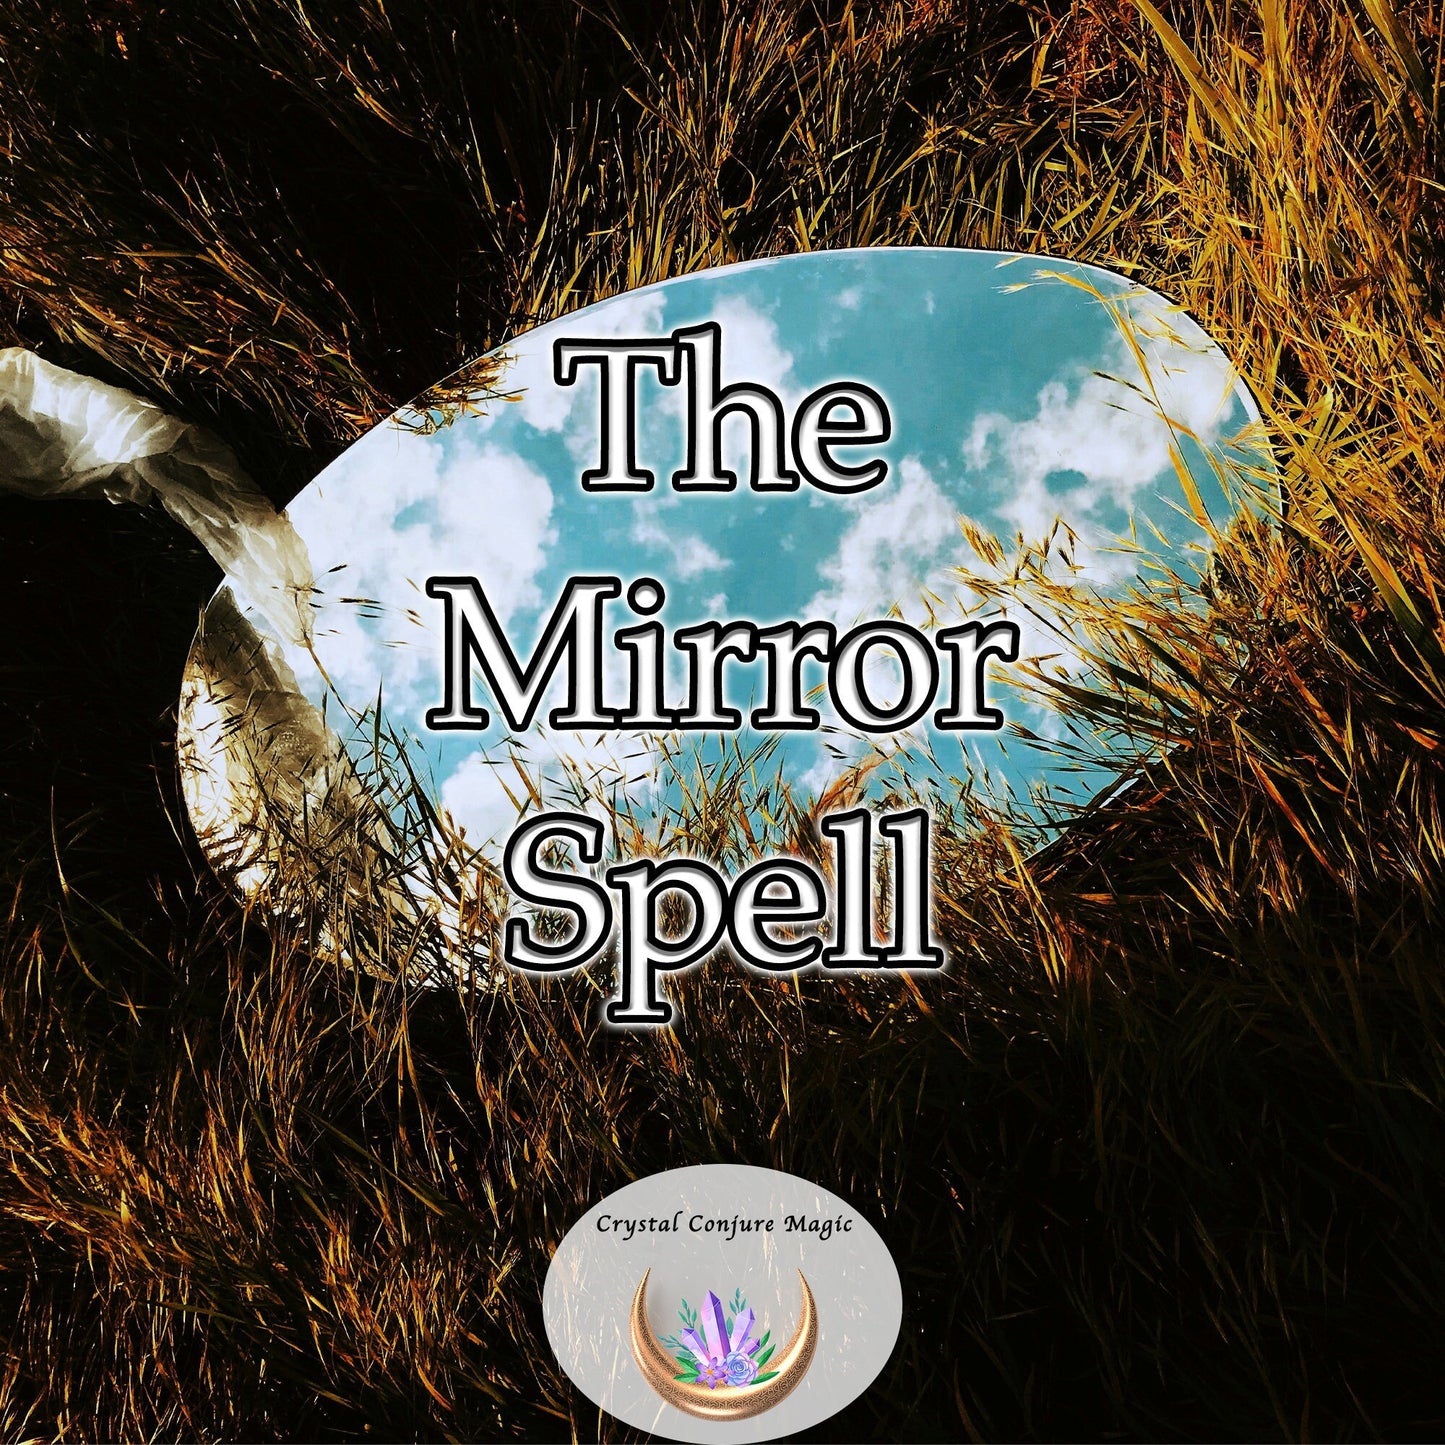 Mirror Spell - return your attacker's harmful intentions with greater force